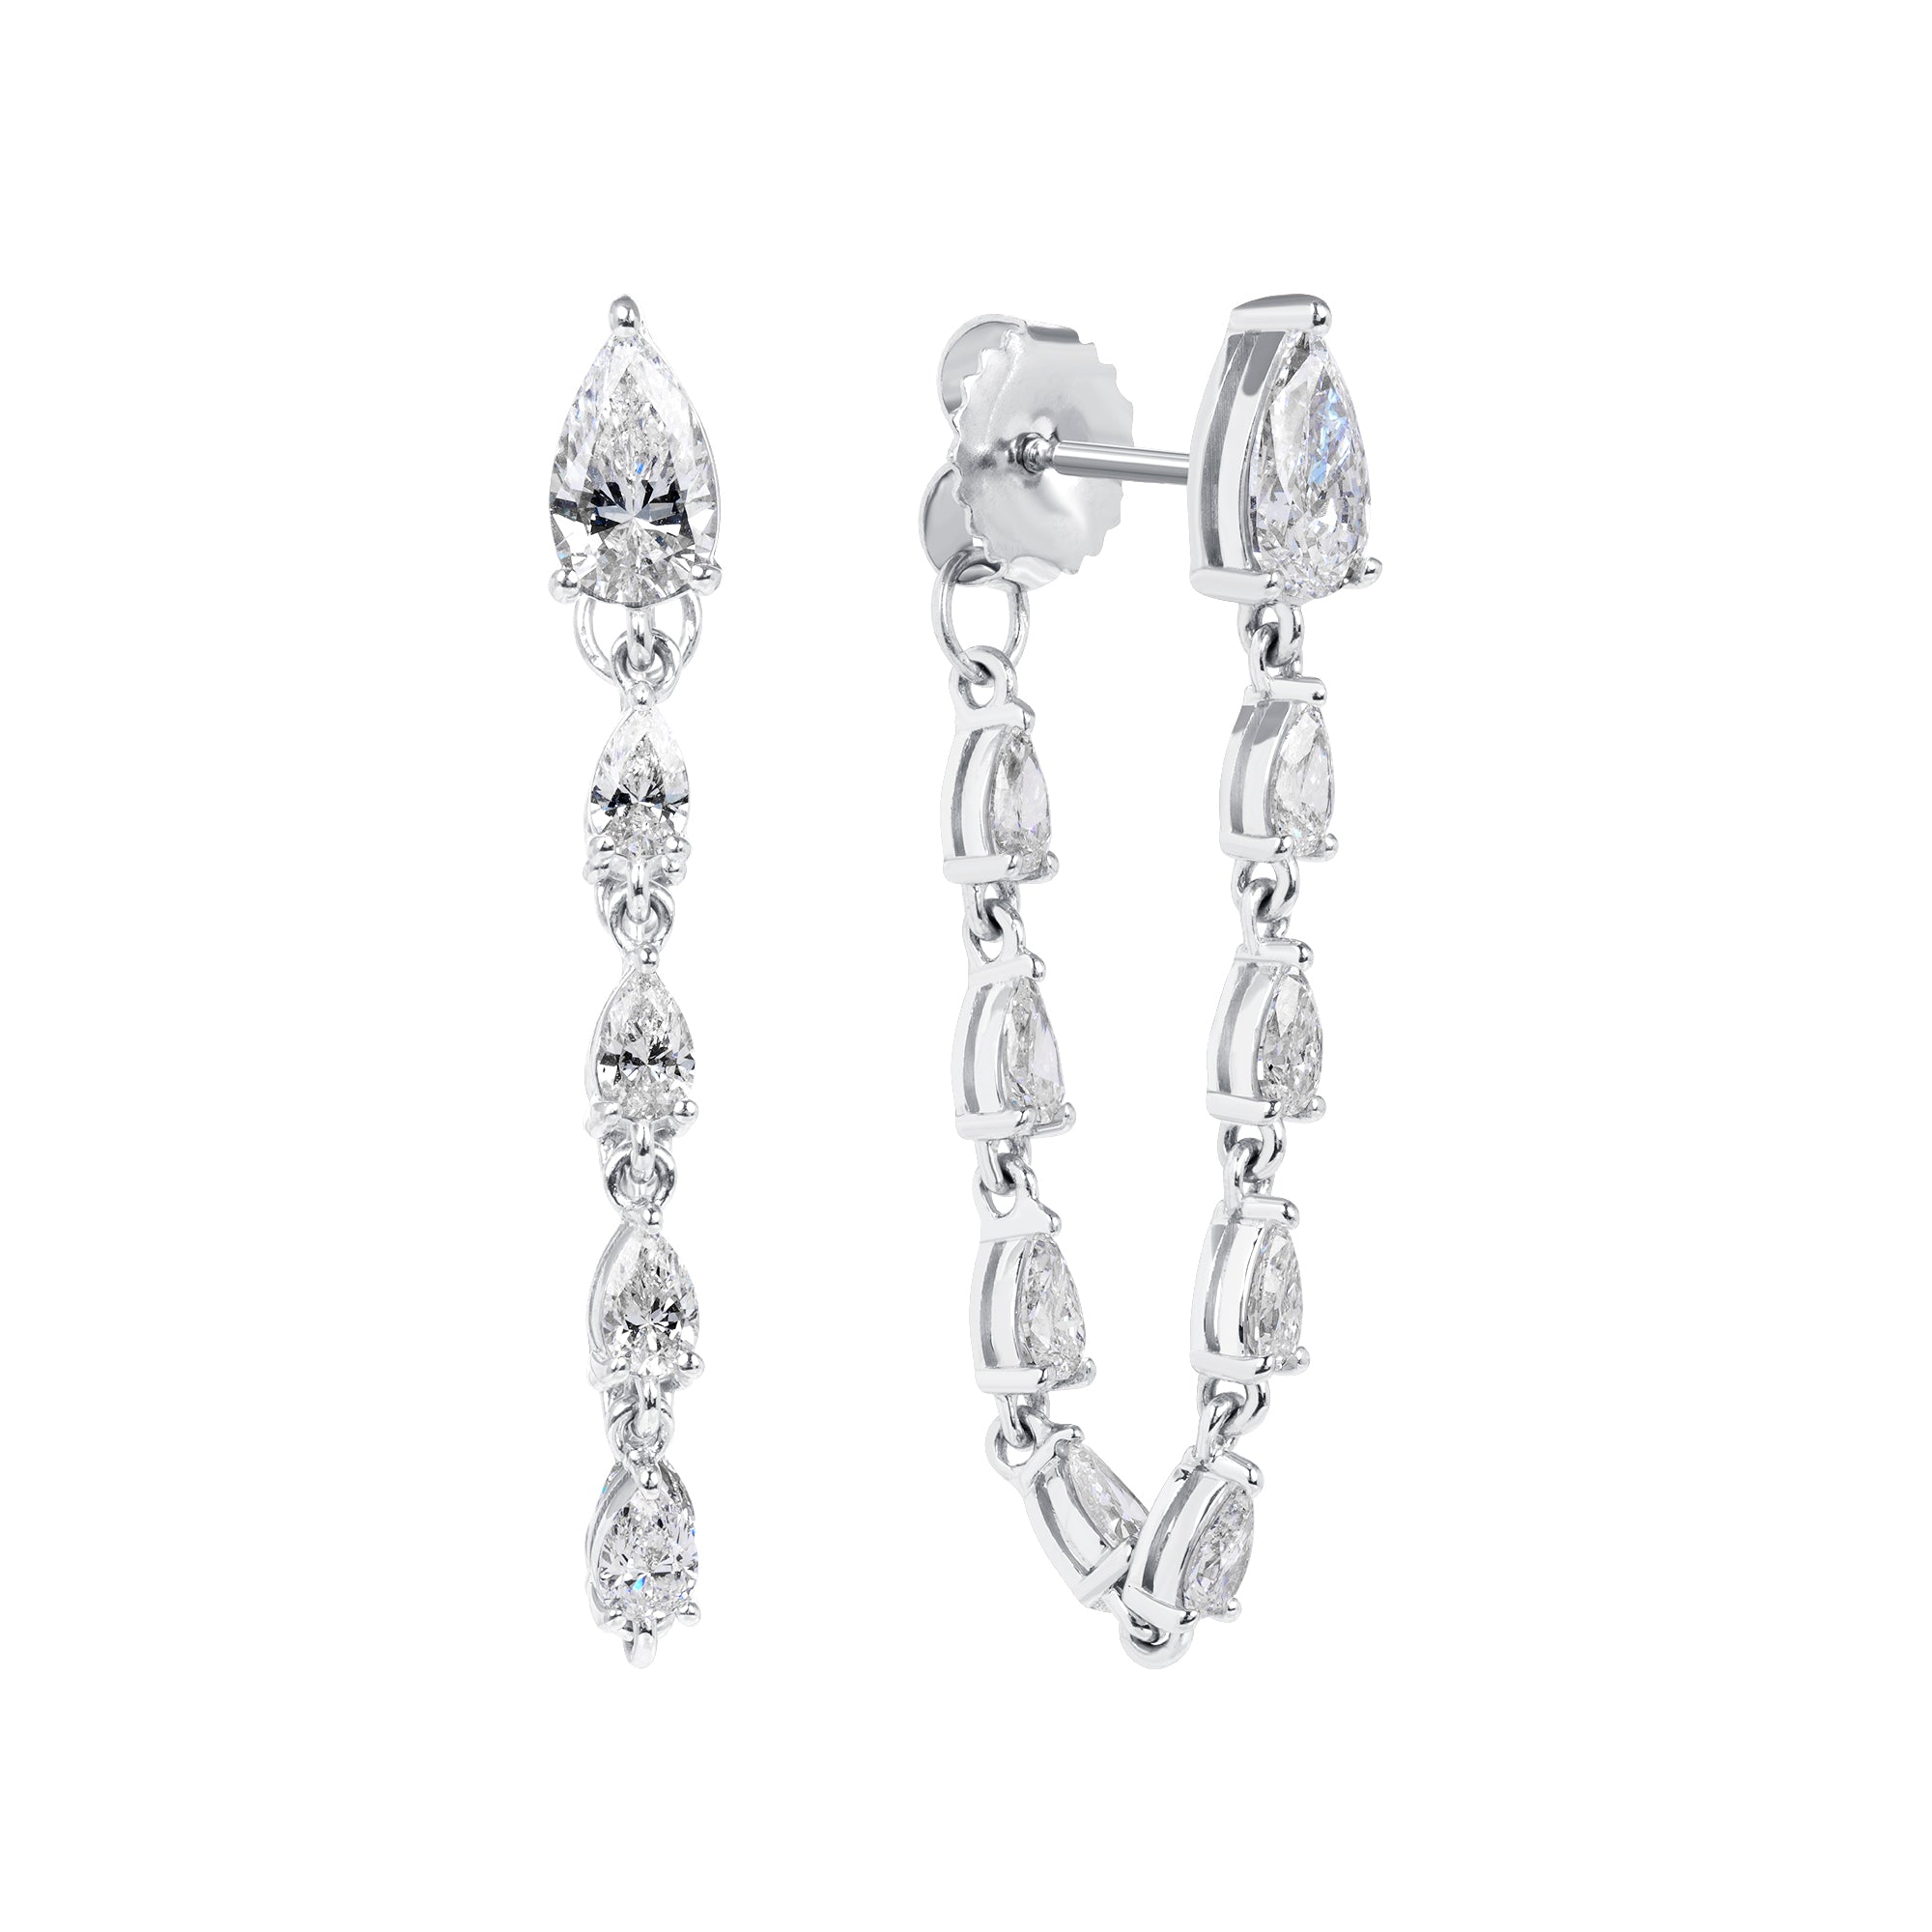 2.58ctw Pear Shape Diamond Drops Front and Back Earrings in 18K White Gold